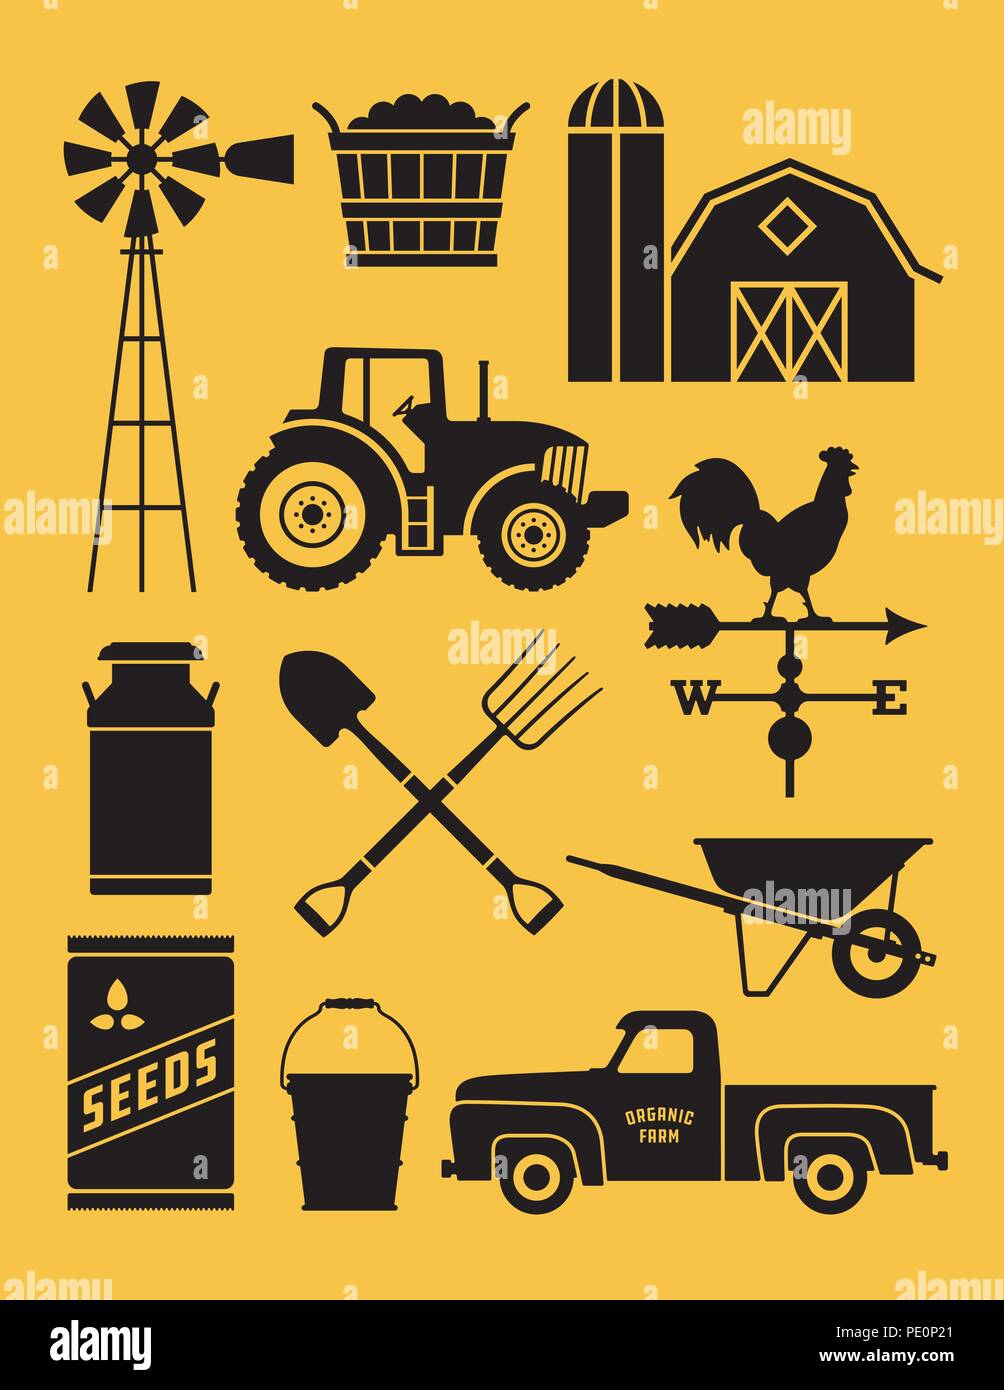 Set of 11 detailed farm icon illustrations. Realistic and highly detailed silhouette illustrations of farm tools, buildings and vehicles. Stock Vector